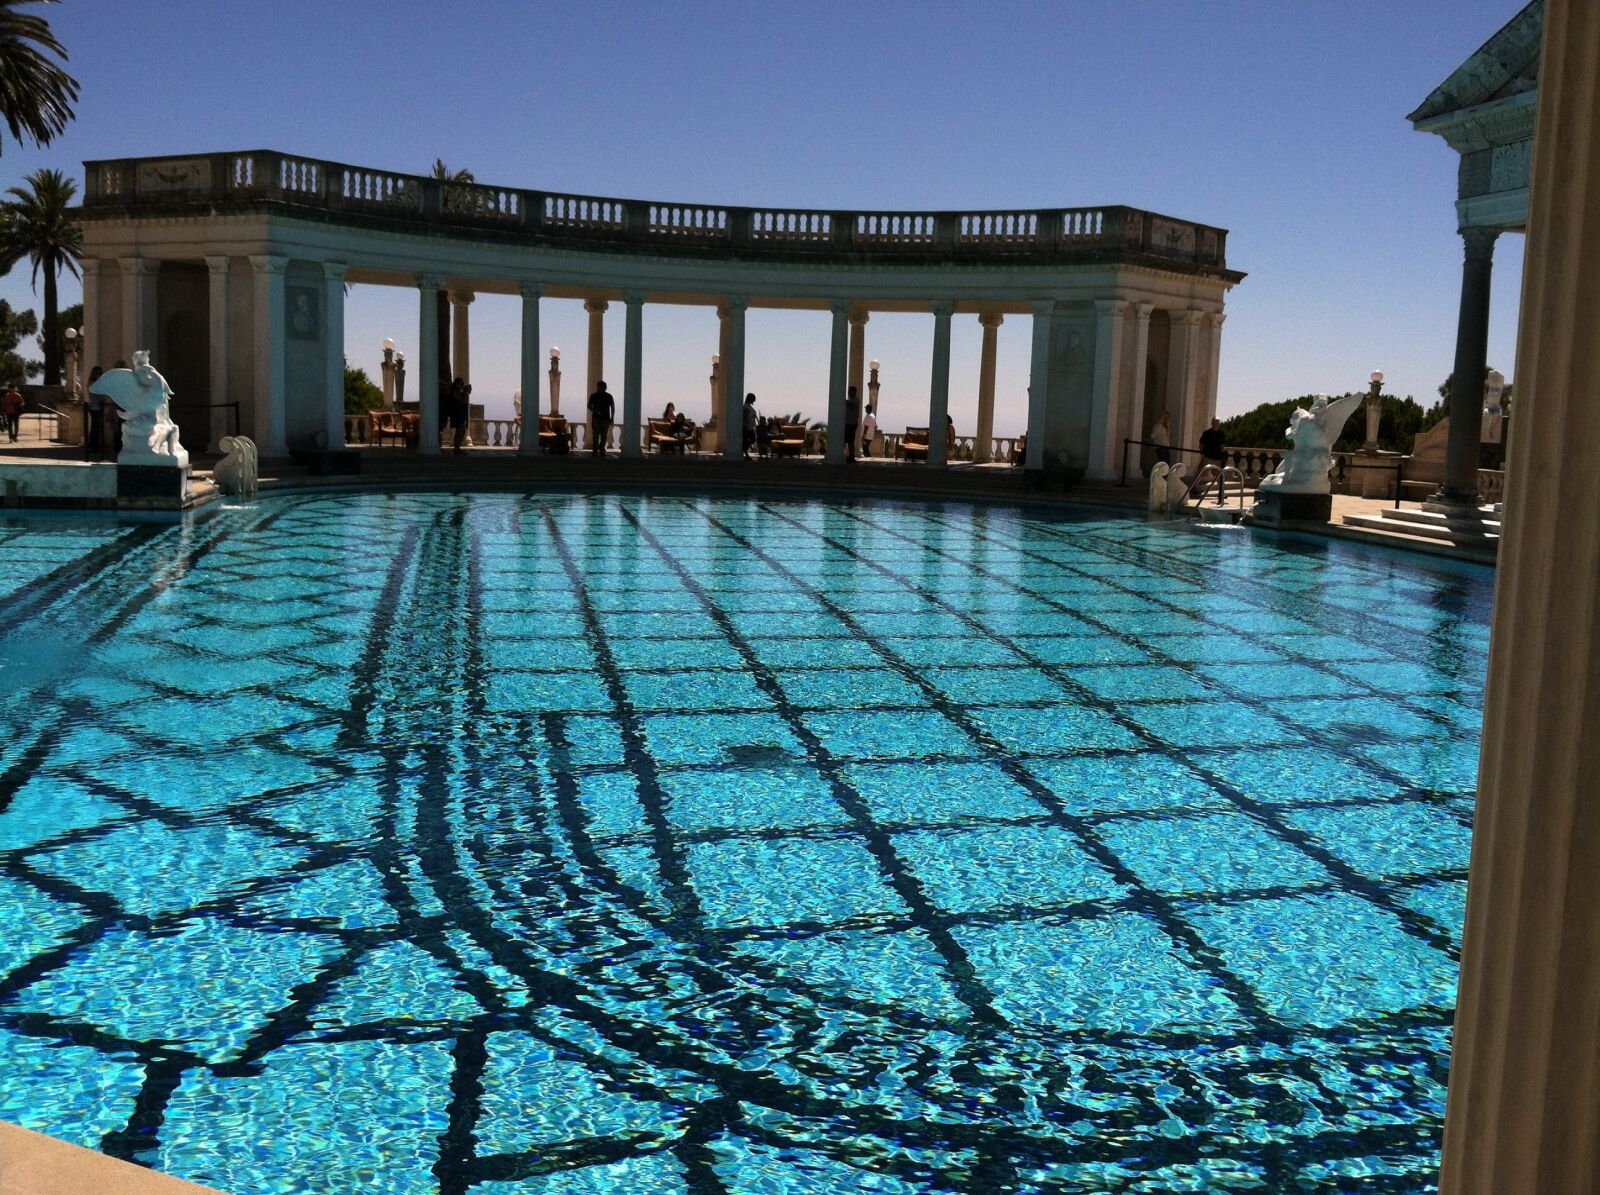 Apple iPhone 4 sample photo. Hearst castle, pool, swimming photography